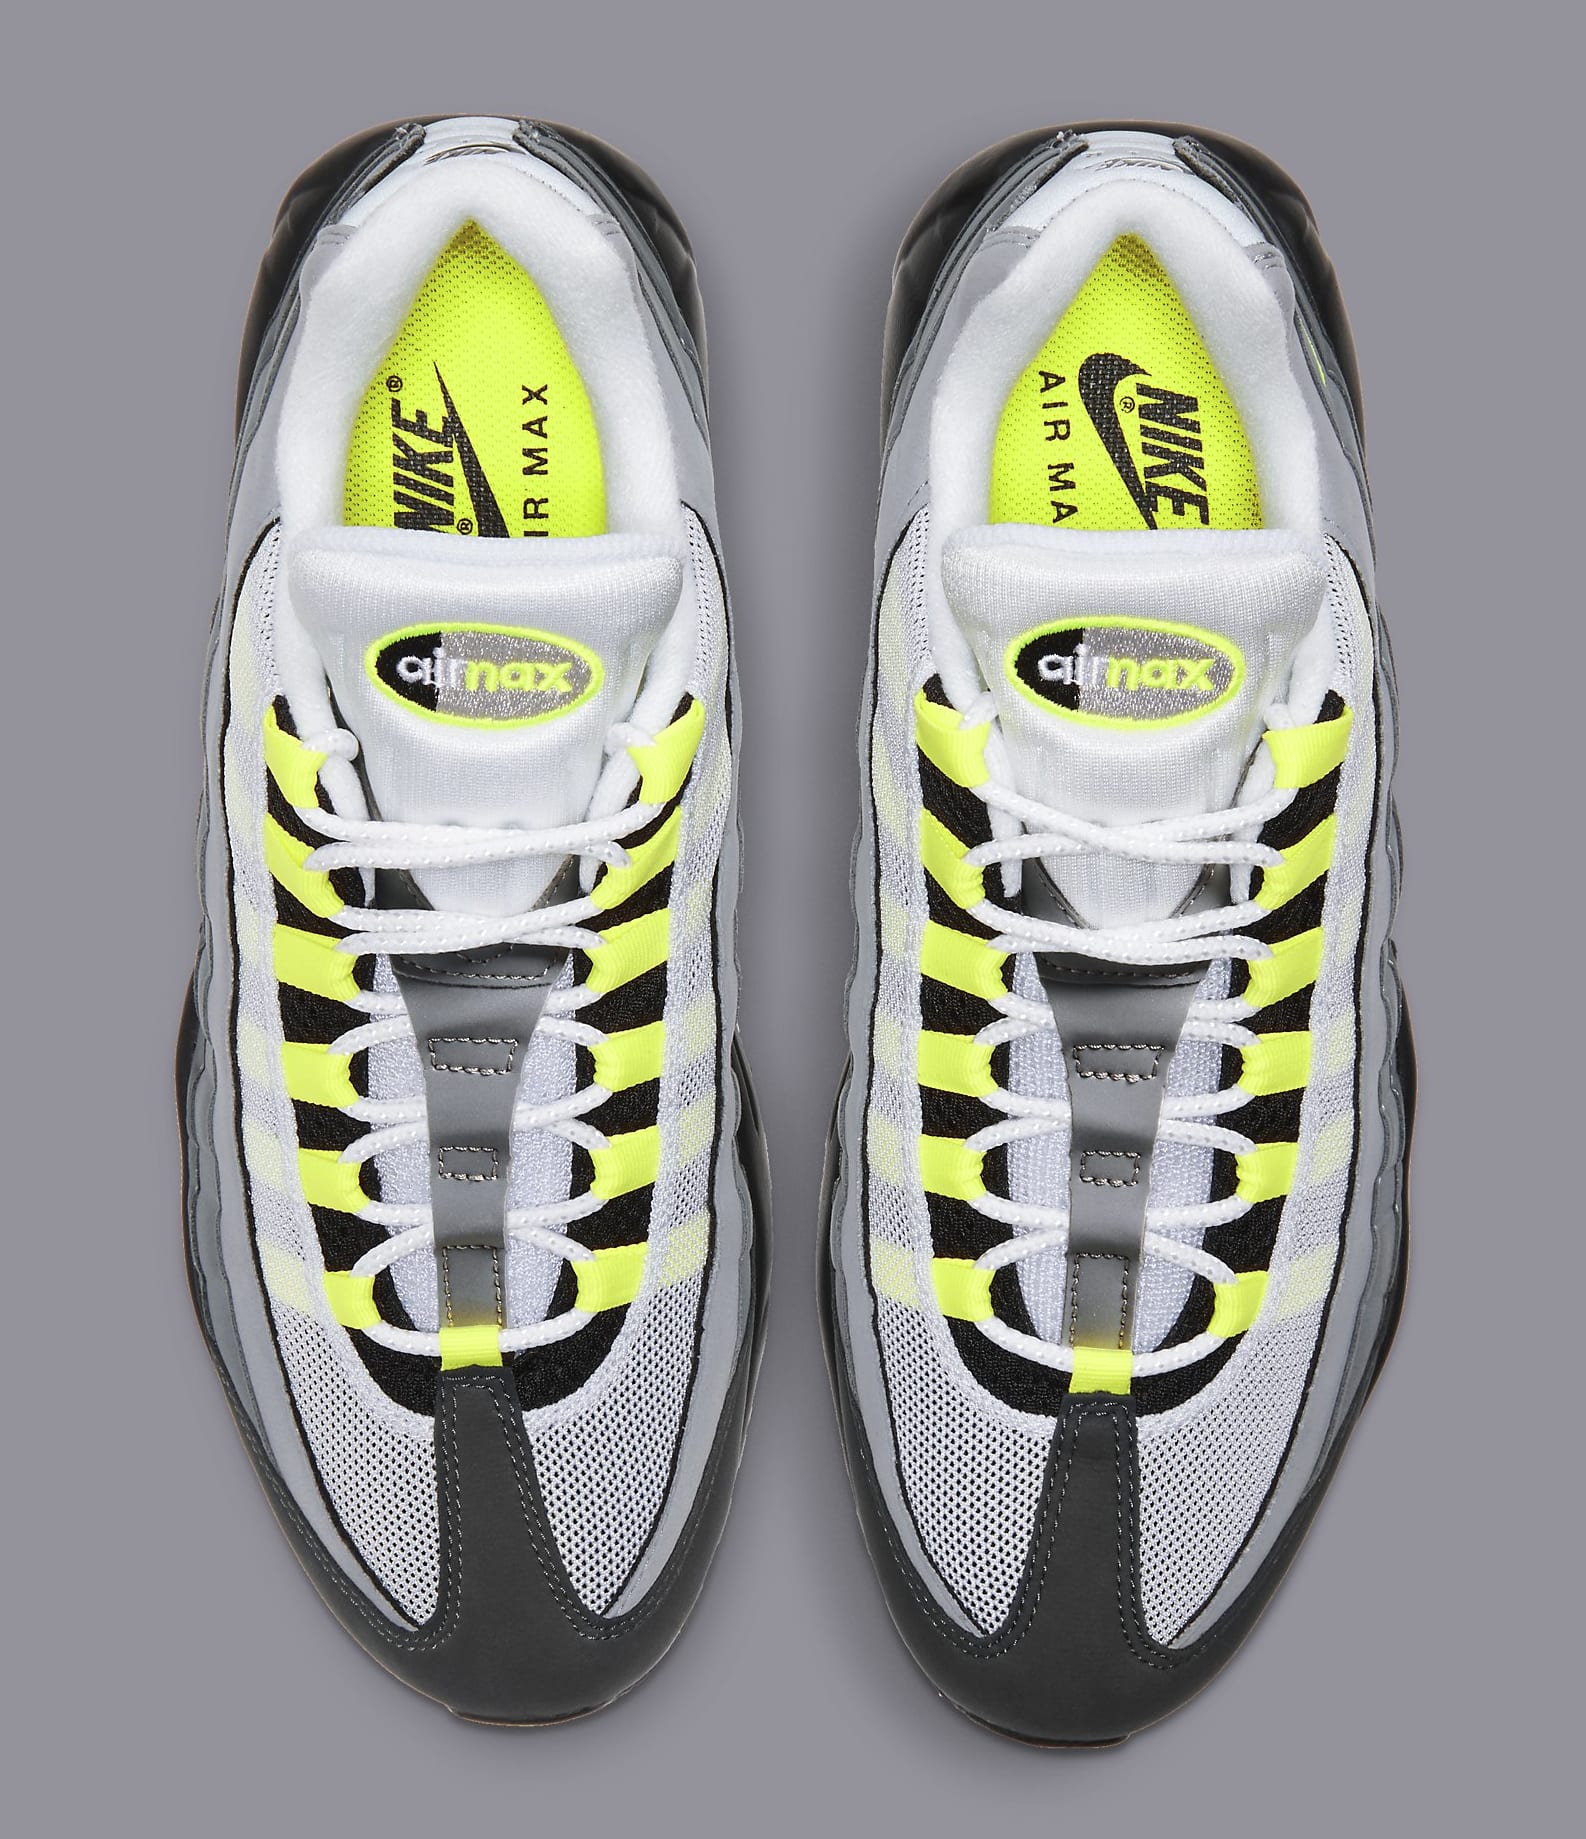 Best Look Yet at This Year's 'Neon' Air Max 95s | Complex